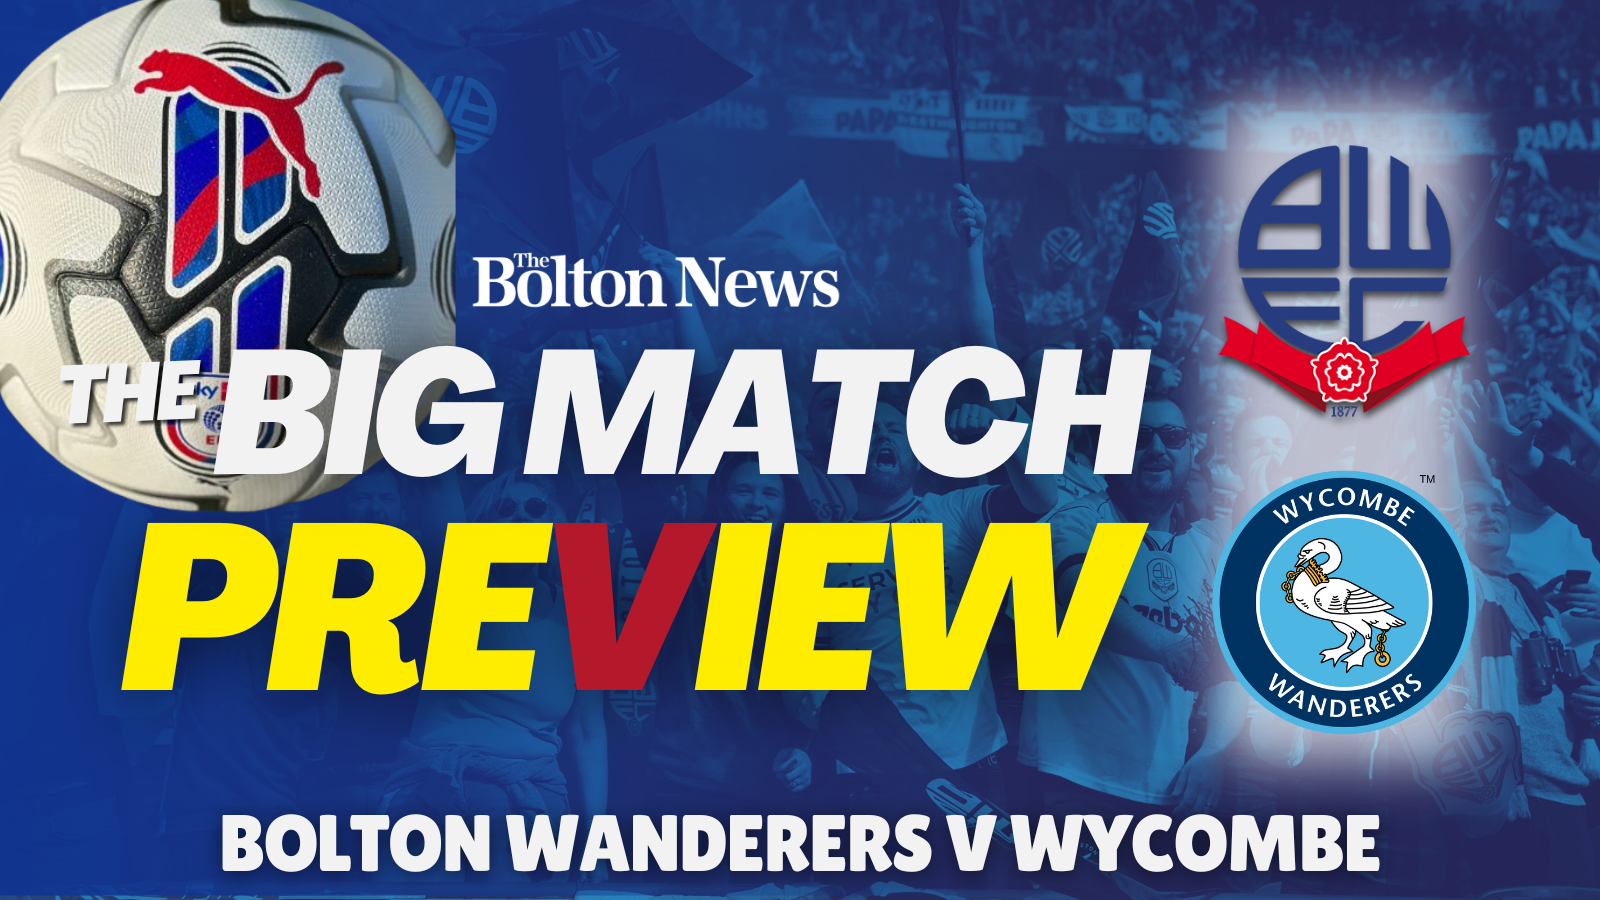 Bolton Wanderers v Wycombe Wanderers - Big Match Preview